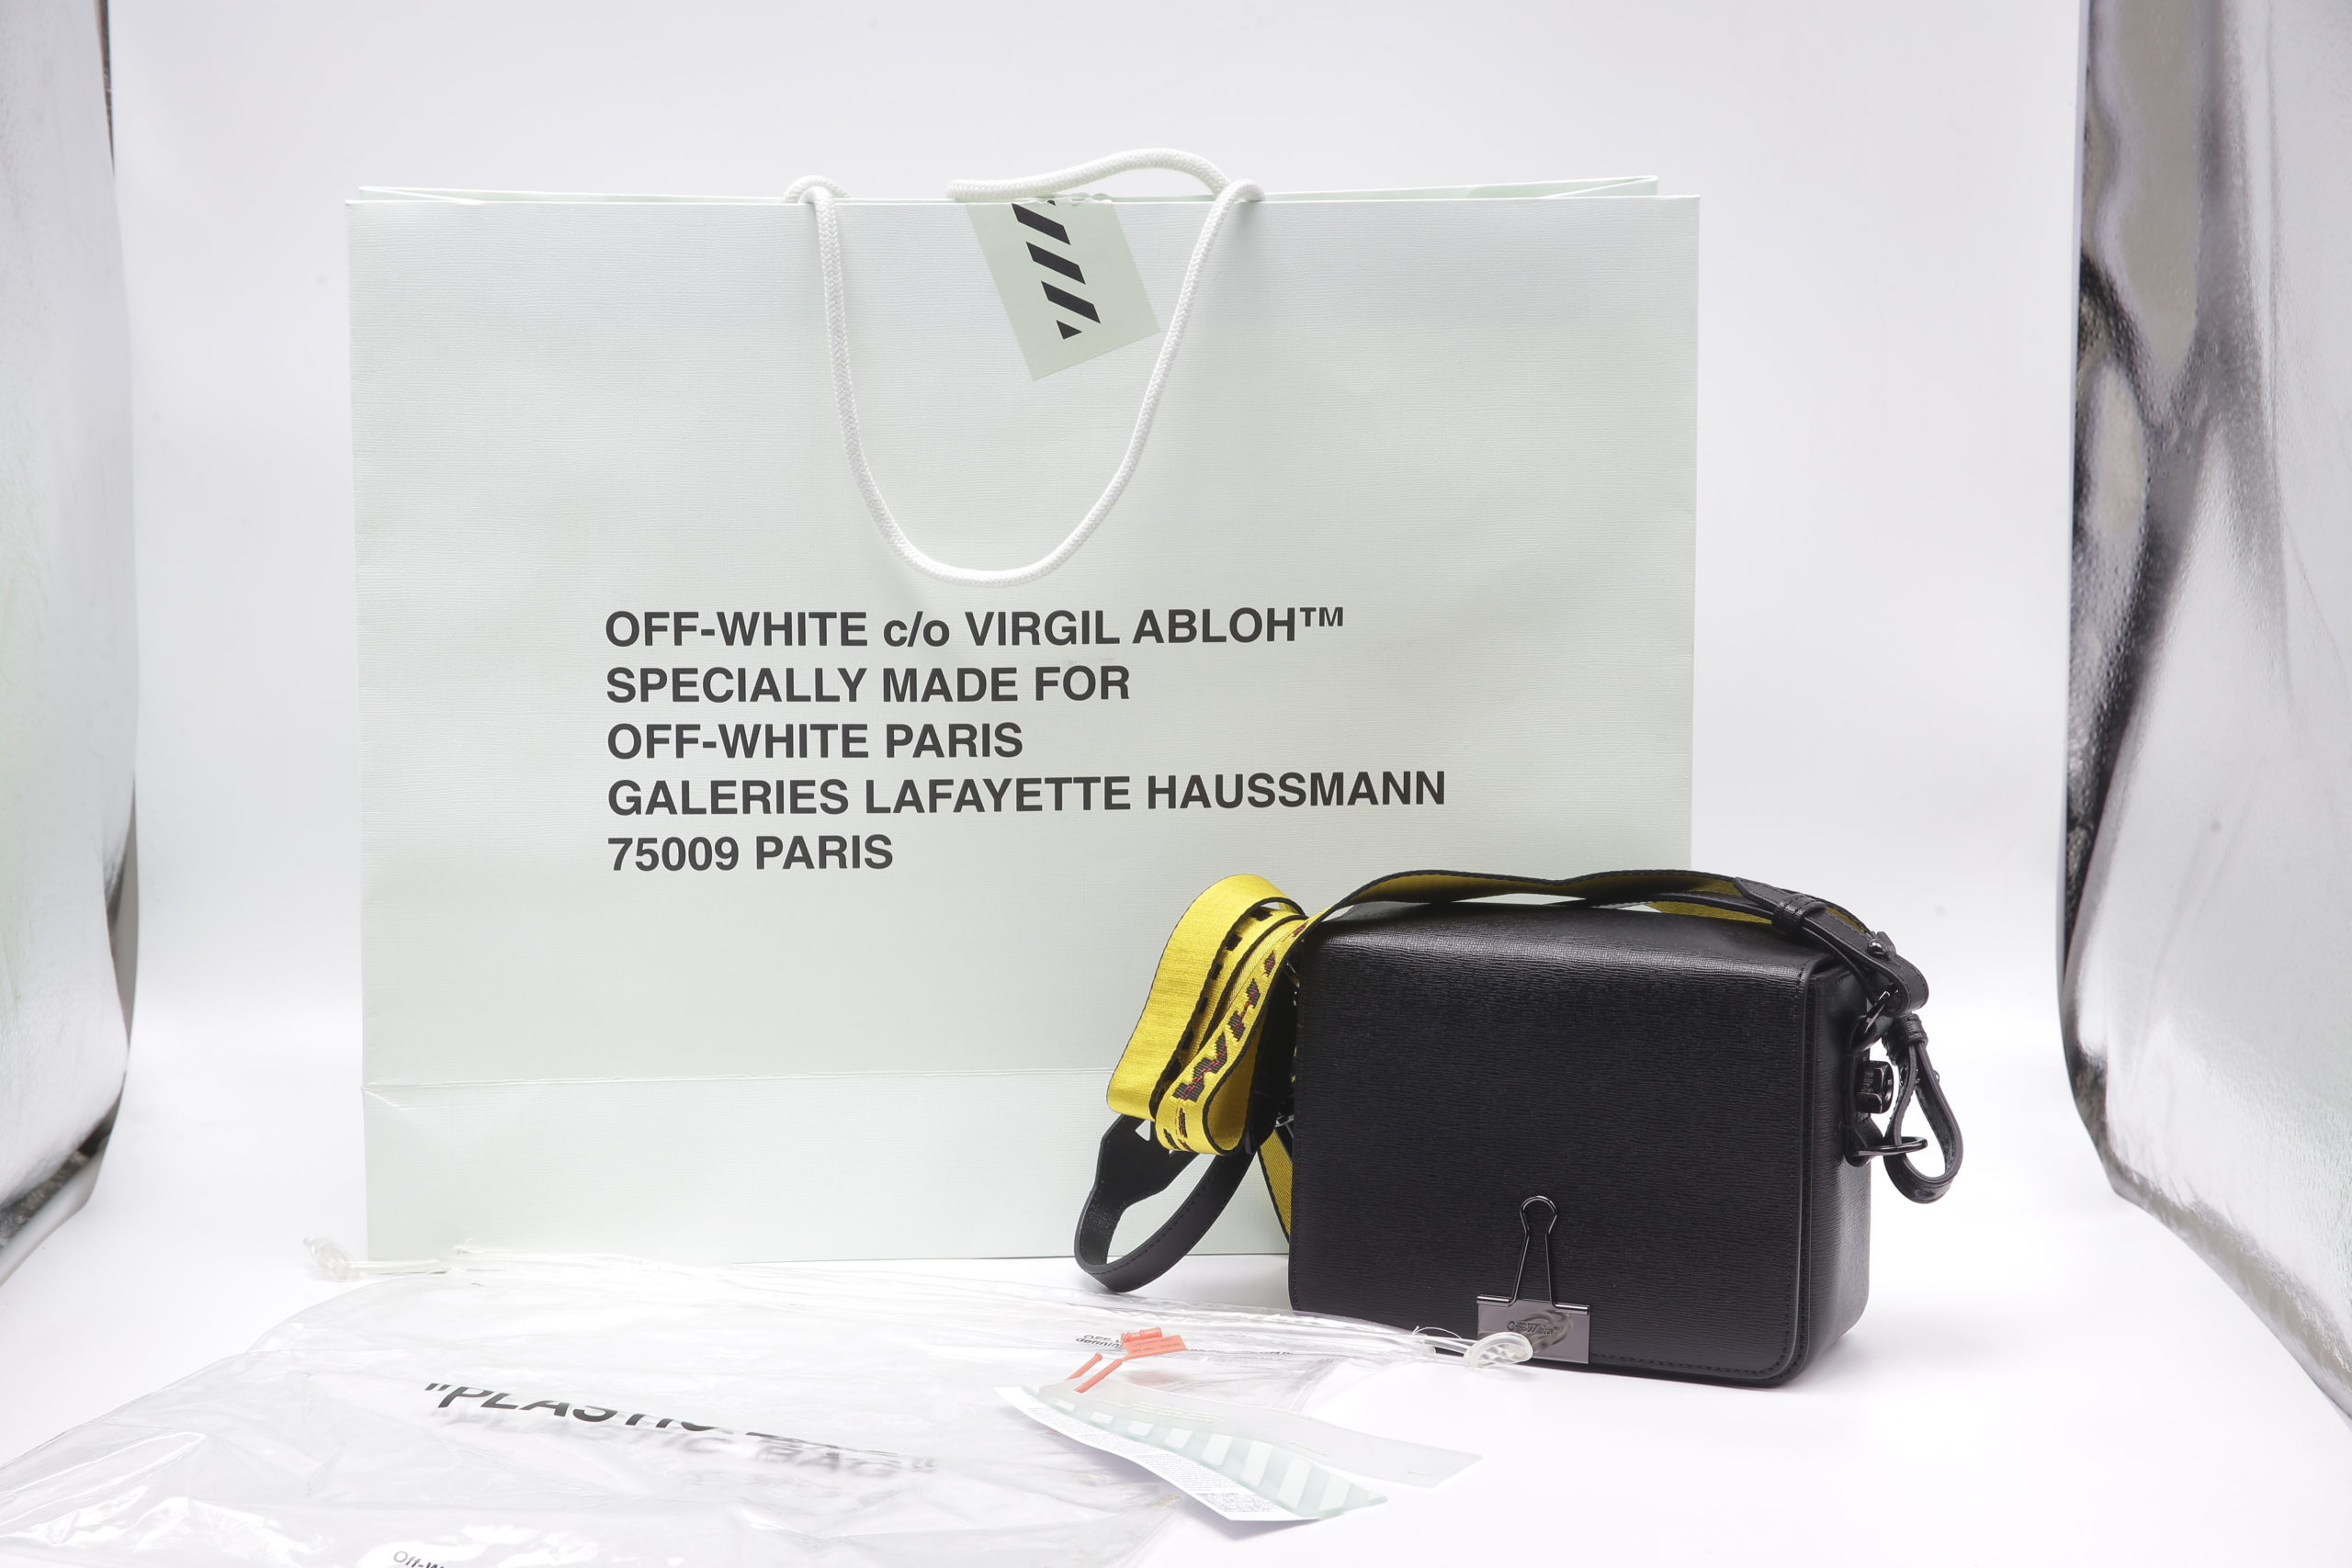 OFF-WHITE Binder Clip Bag Comparison, Review + TRY ON: 